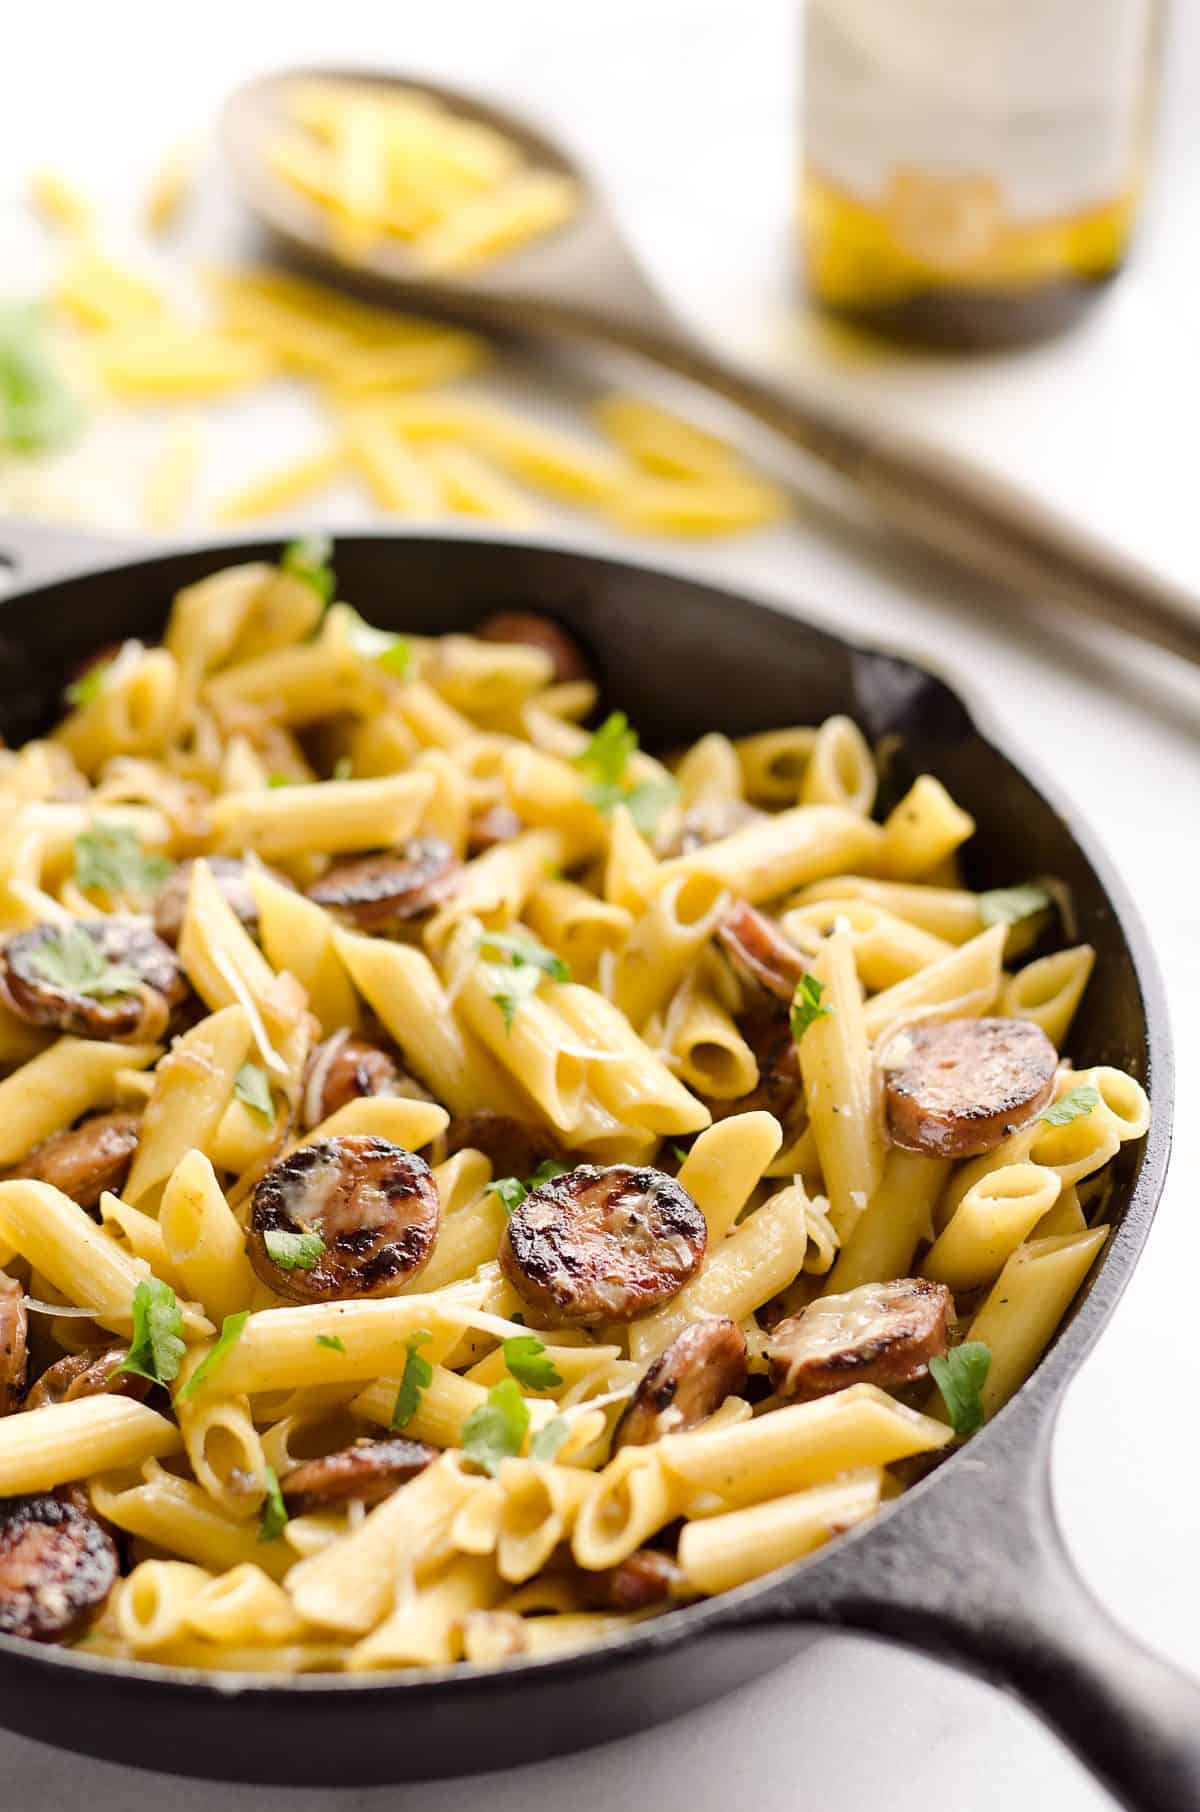 Chicken Sausage & Penne Skillet is an easy gluten free dinner idea loaded with rich flavors. Penne Pasta is tossed with a white wine and Parmesan cream sauce along with chicken apple sausage and shallots for a hearty dinner bursting with amazing flavor. 